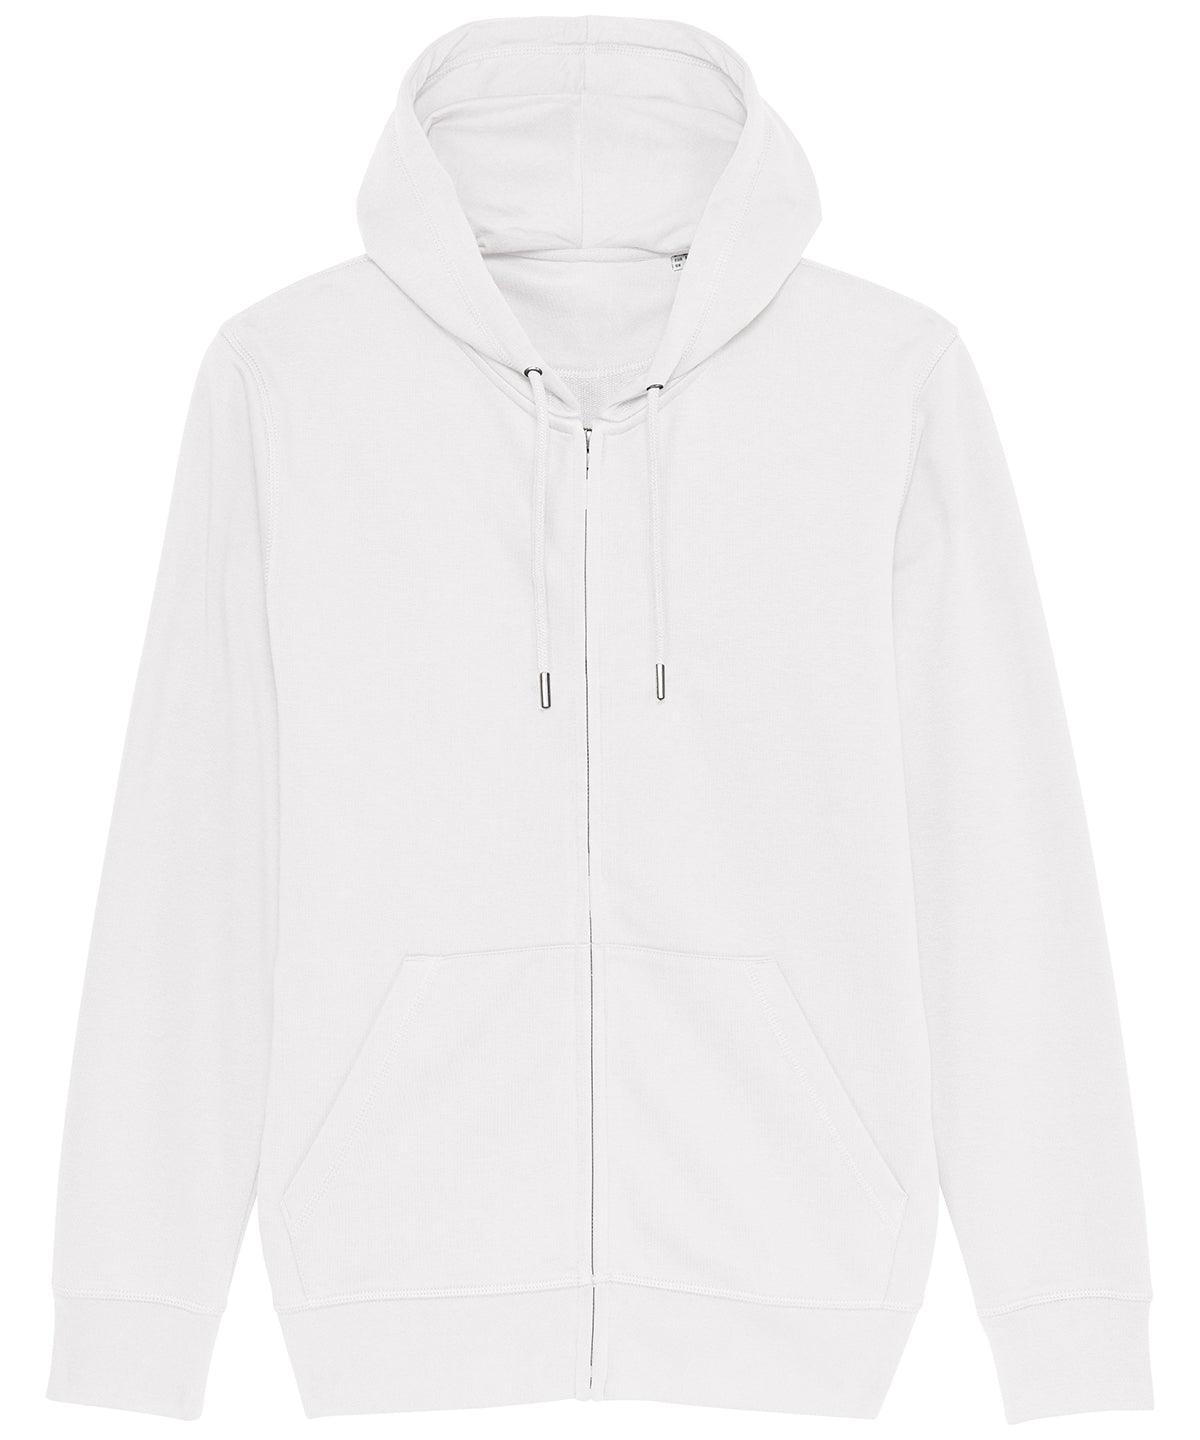 White* - Unisex Connector essential zip-thru hoodie sweatshirt (STSU820) Hoodies Stanley/Stella Conscious cold weather styles, Exclusives, Hoodies, Must Haves, New Colours for 2023, New Sizes for 2022, Organic & Conscious, Plus Sizes, Raladeal - Recently Added Schoolwear Centres